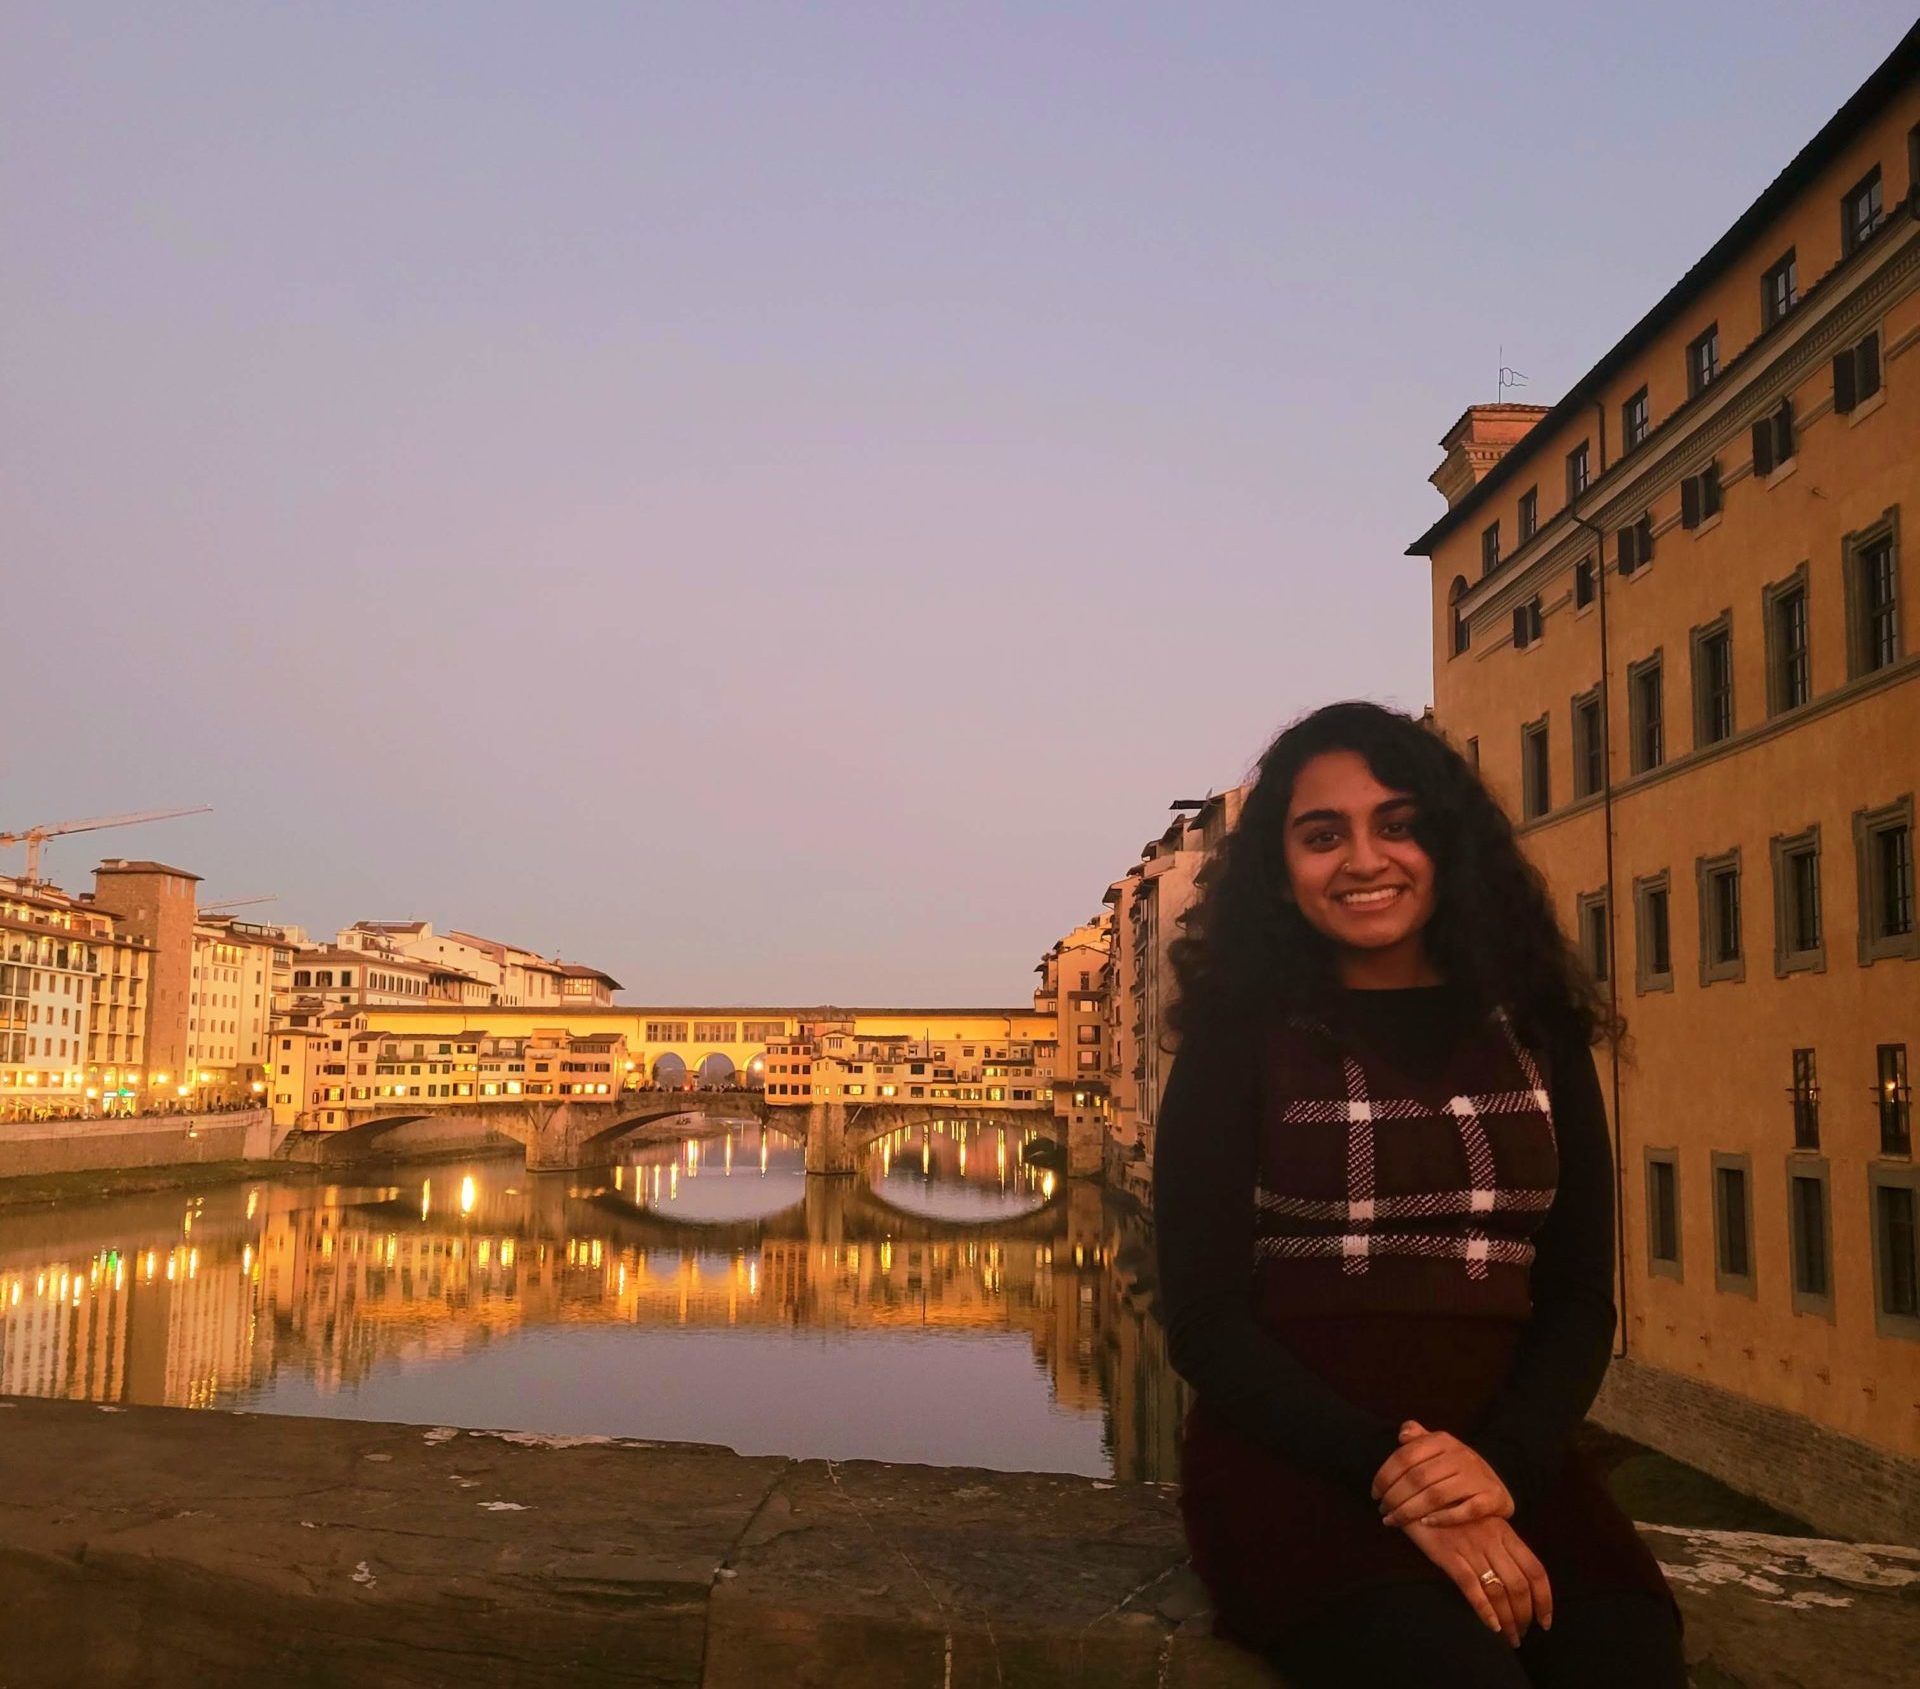 Eshika smiling in front of the Ponte Vecchio at sunset.